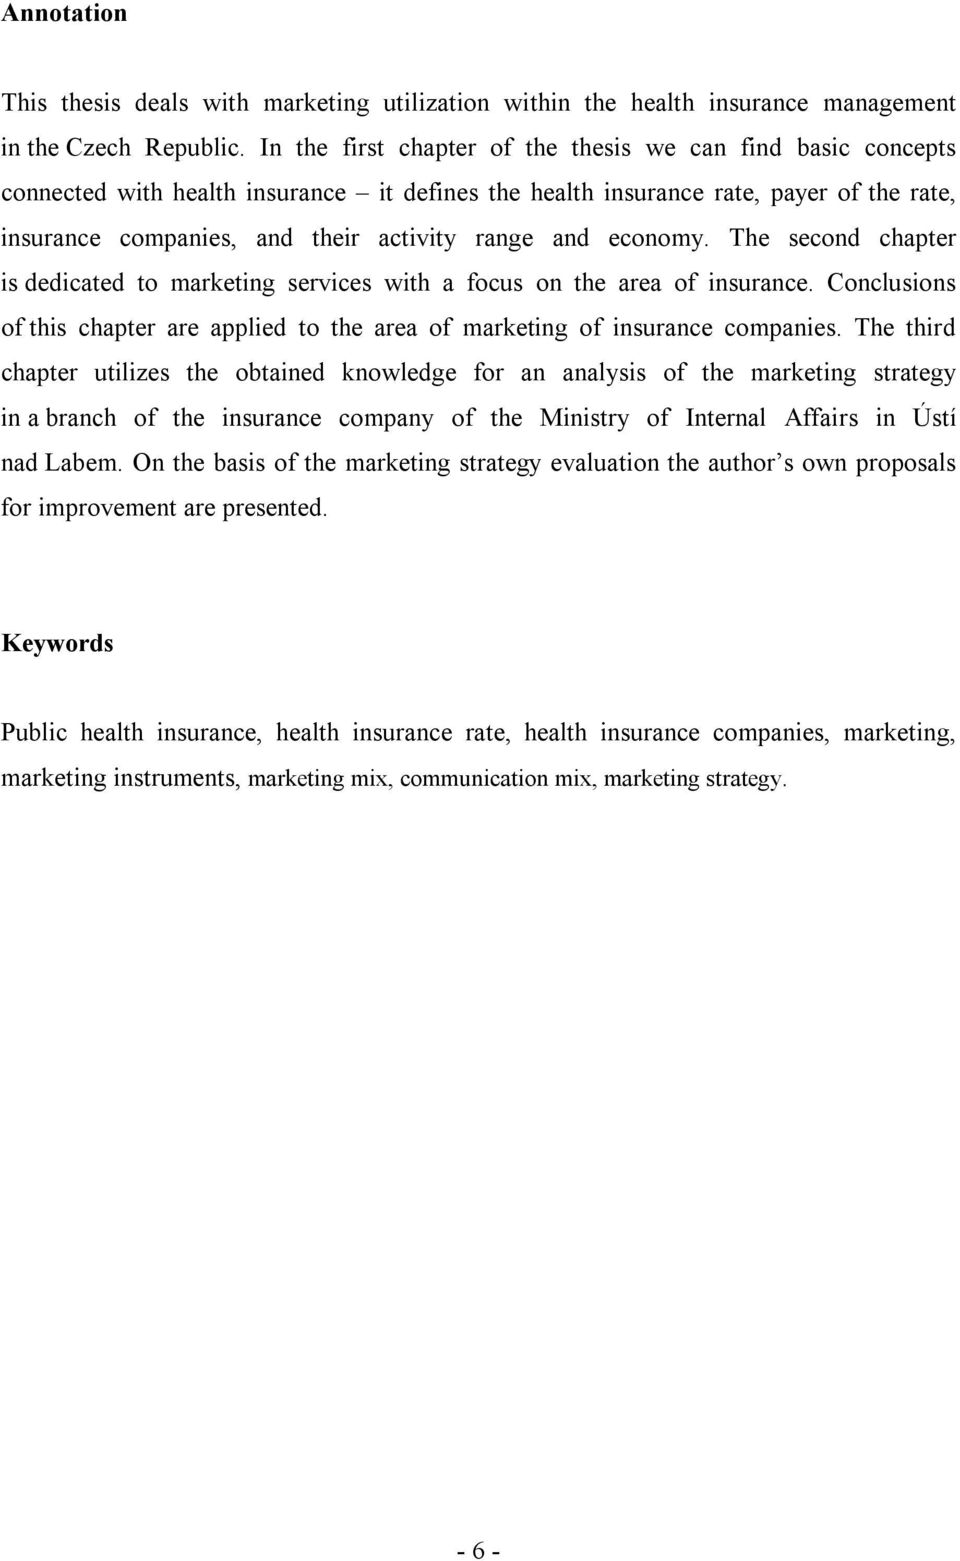 and economy. The second chapter is dedicated to marketing services with a focus on the area of insurance. Conclusions of this chapter are applied to the area of marketing of insurance companies.